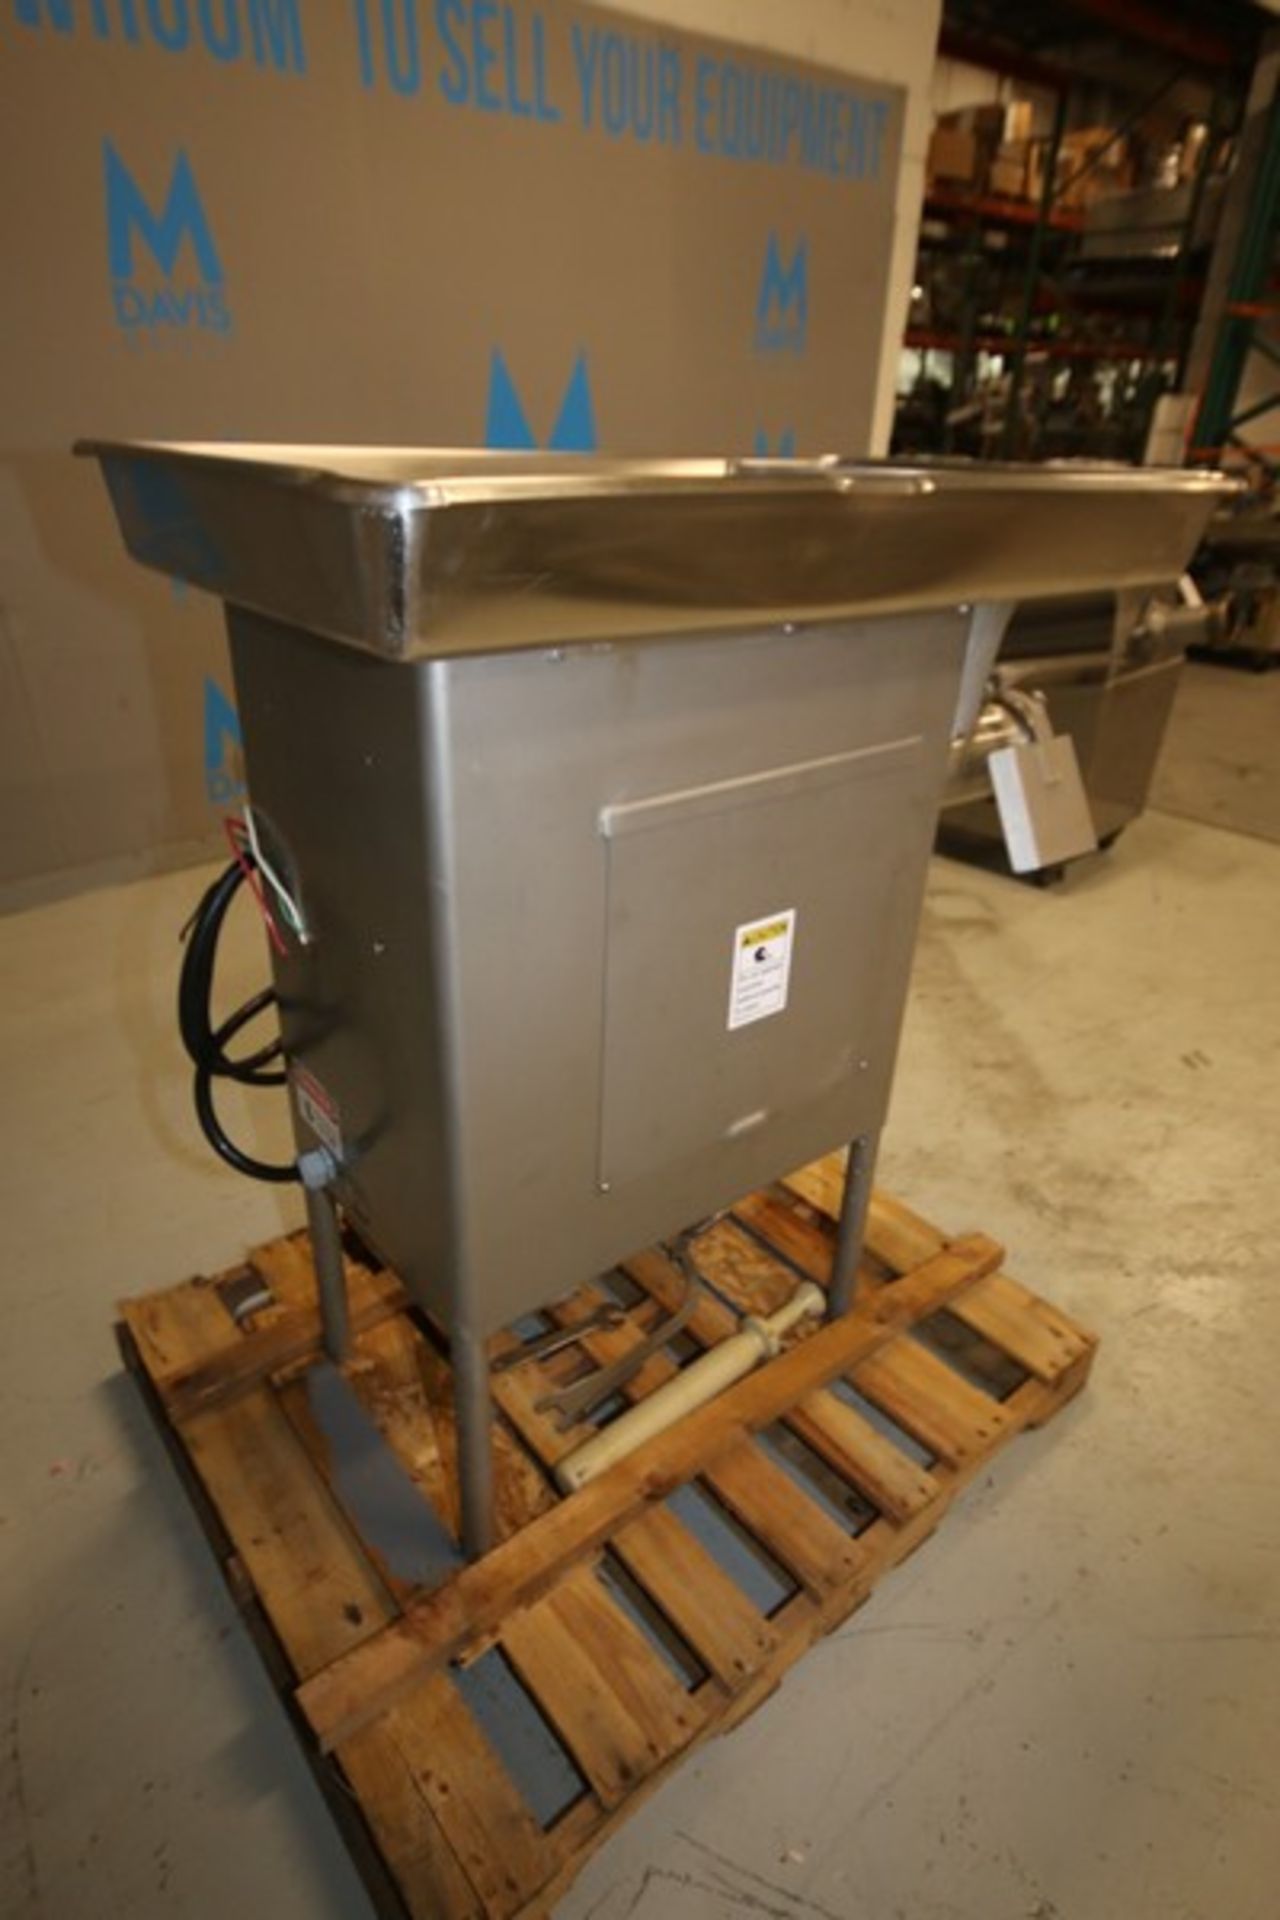 Butcher Boy S/S Floor Grinder, Model A52, SN 17012189, 7.5 hp, 460 V (INV#83499)(Located @ the MDG - Image 2 of 7